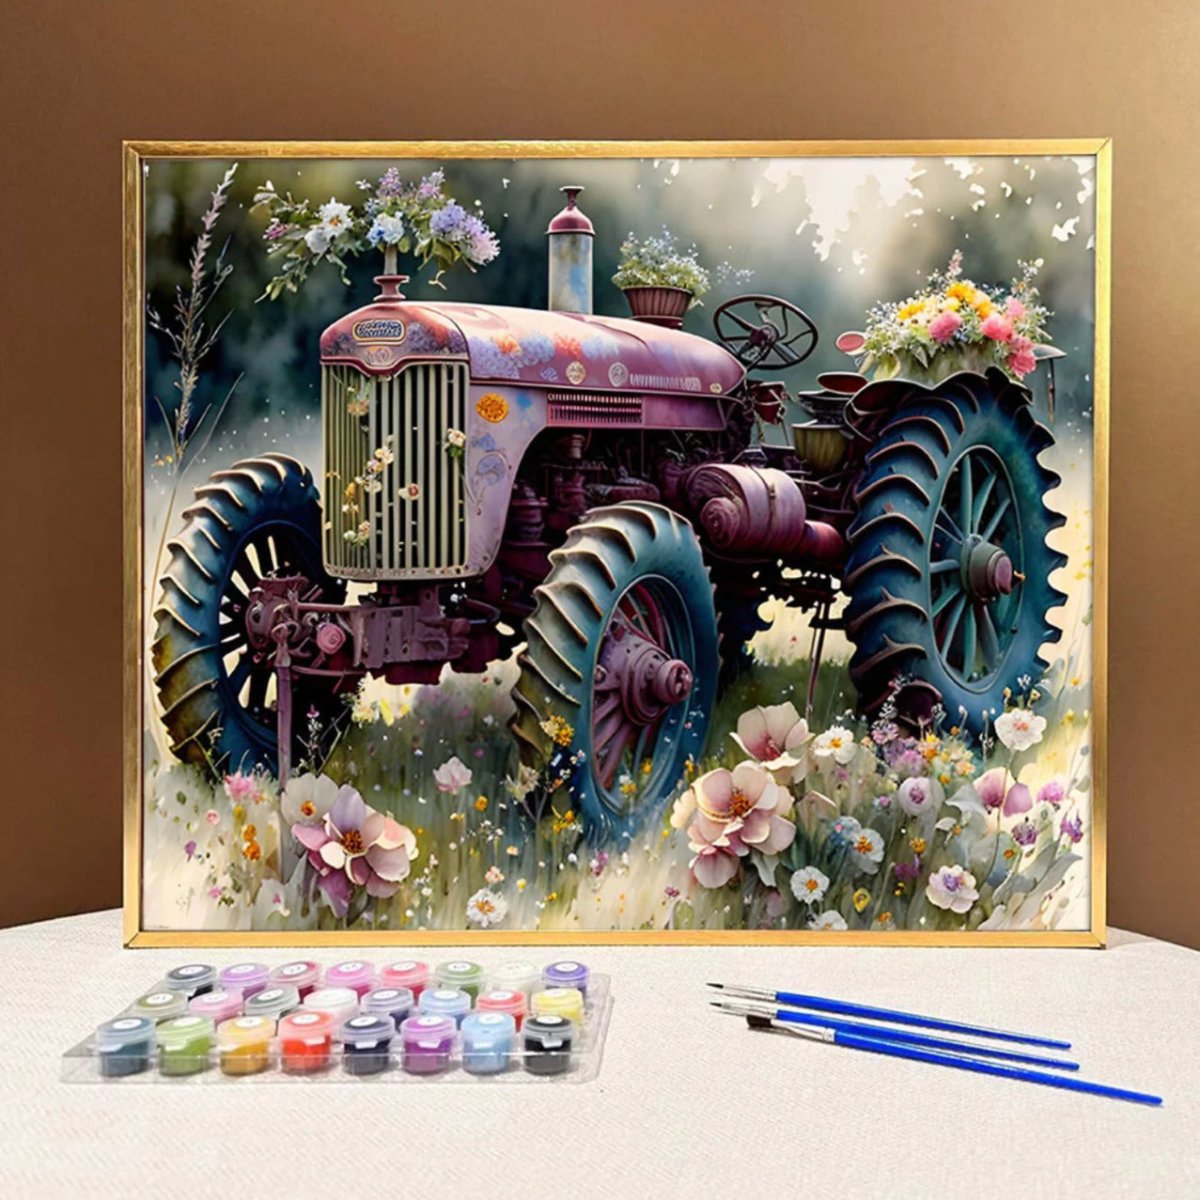 Cool Tractor - Paint By Numbers - Paint by numbers for adult